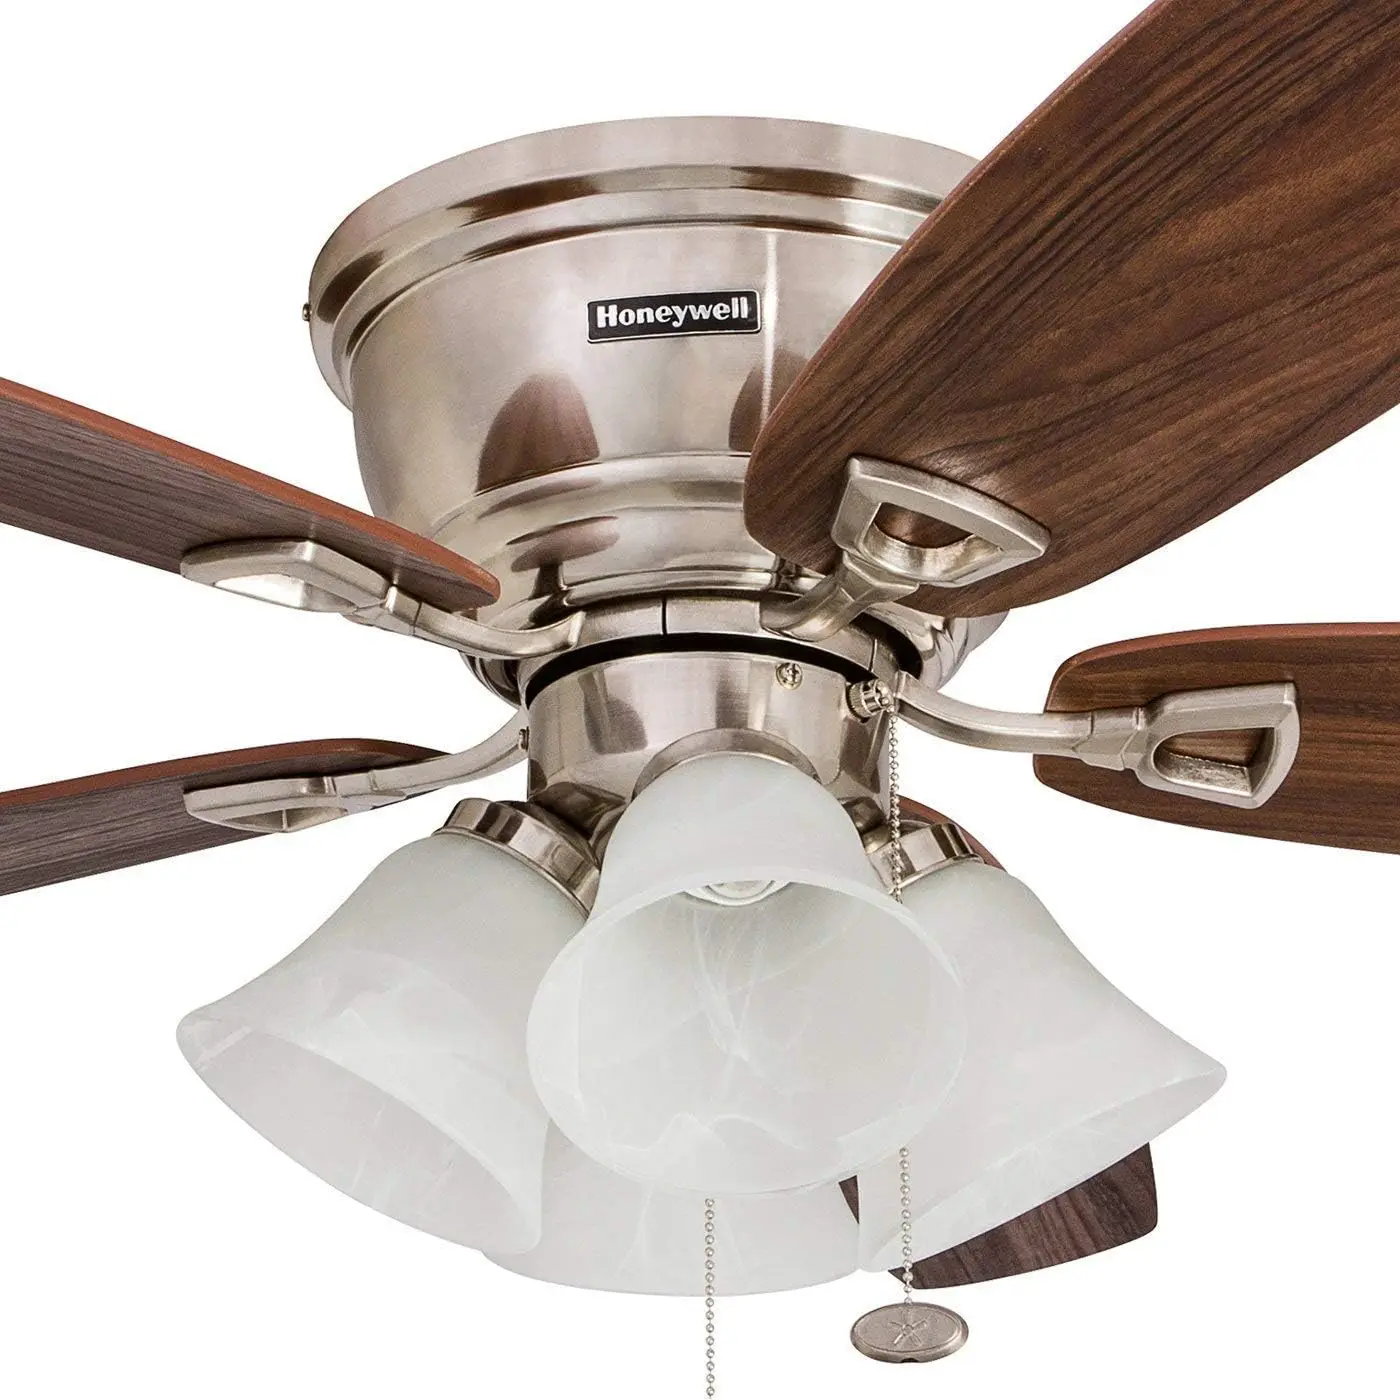 

52 Inch Classic Flush Mount Indoor LED Ceiling Fan with Light, Pull Chain, Quick-2-Hang Dual Finish Blades, Reversible Motor